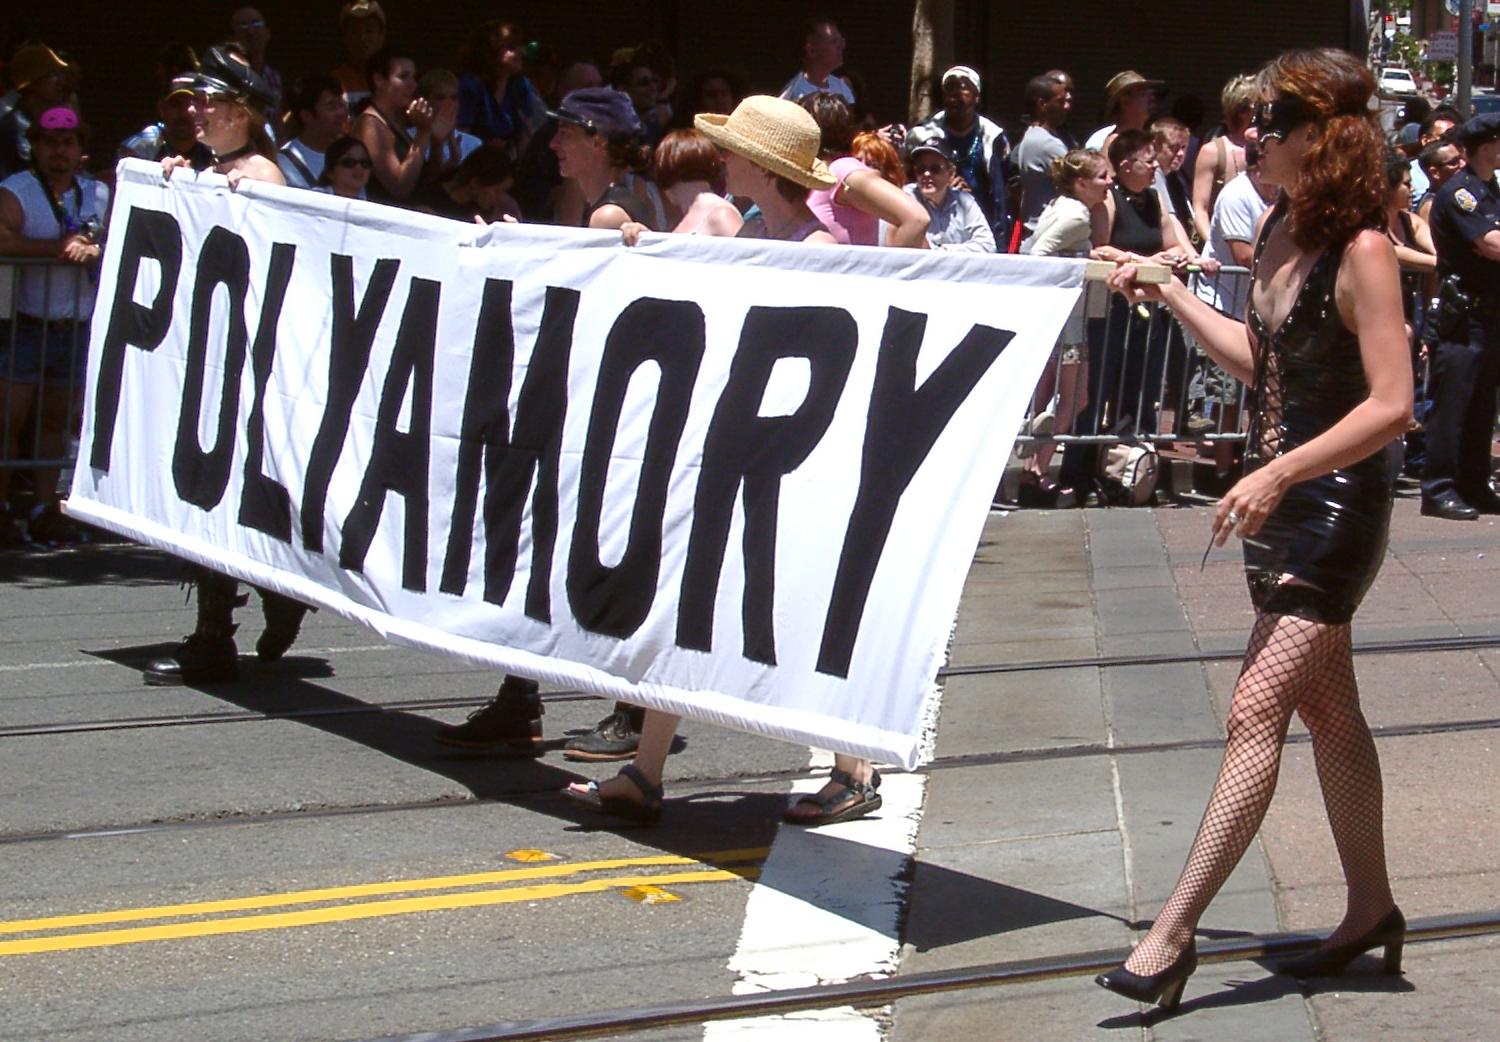 A line of people hold a banner that says "POLYAMORY."